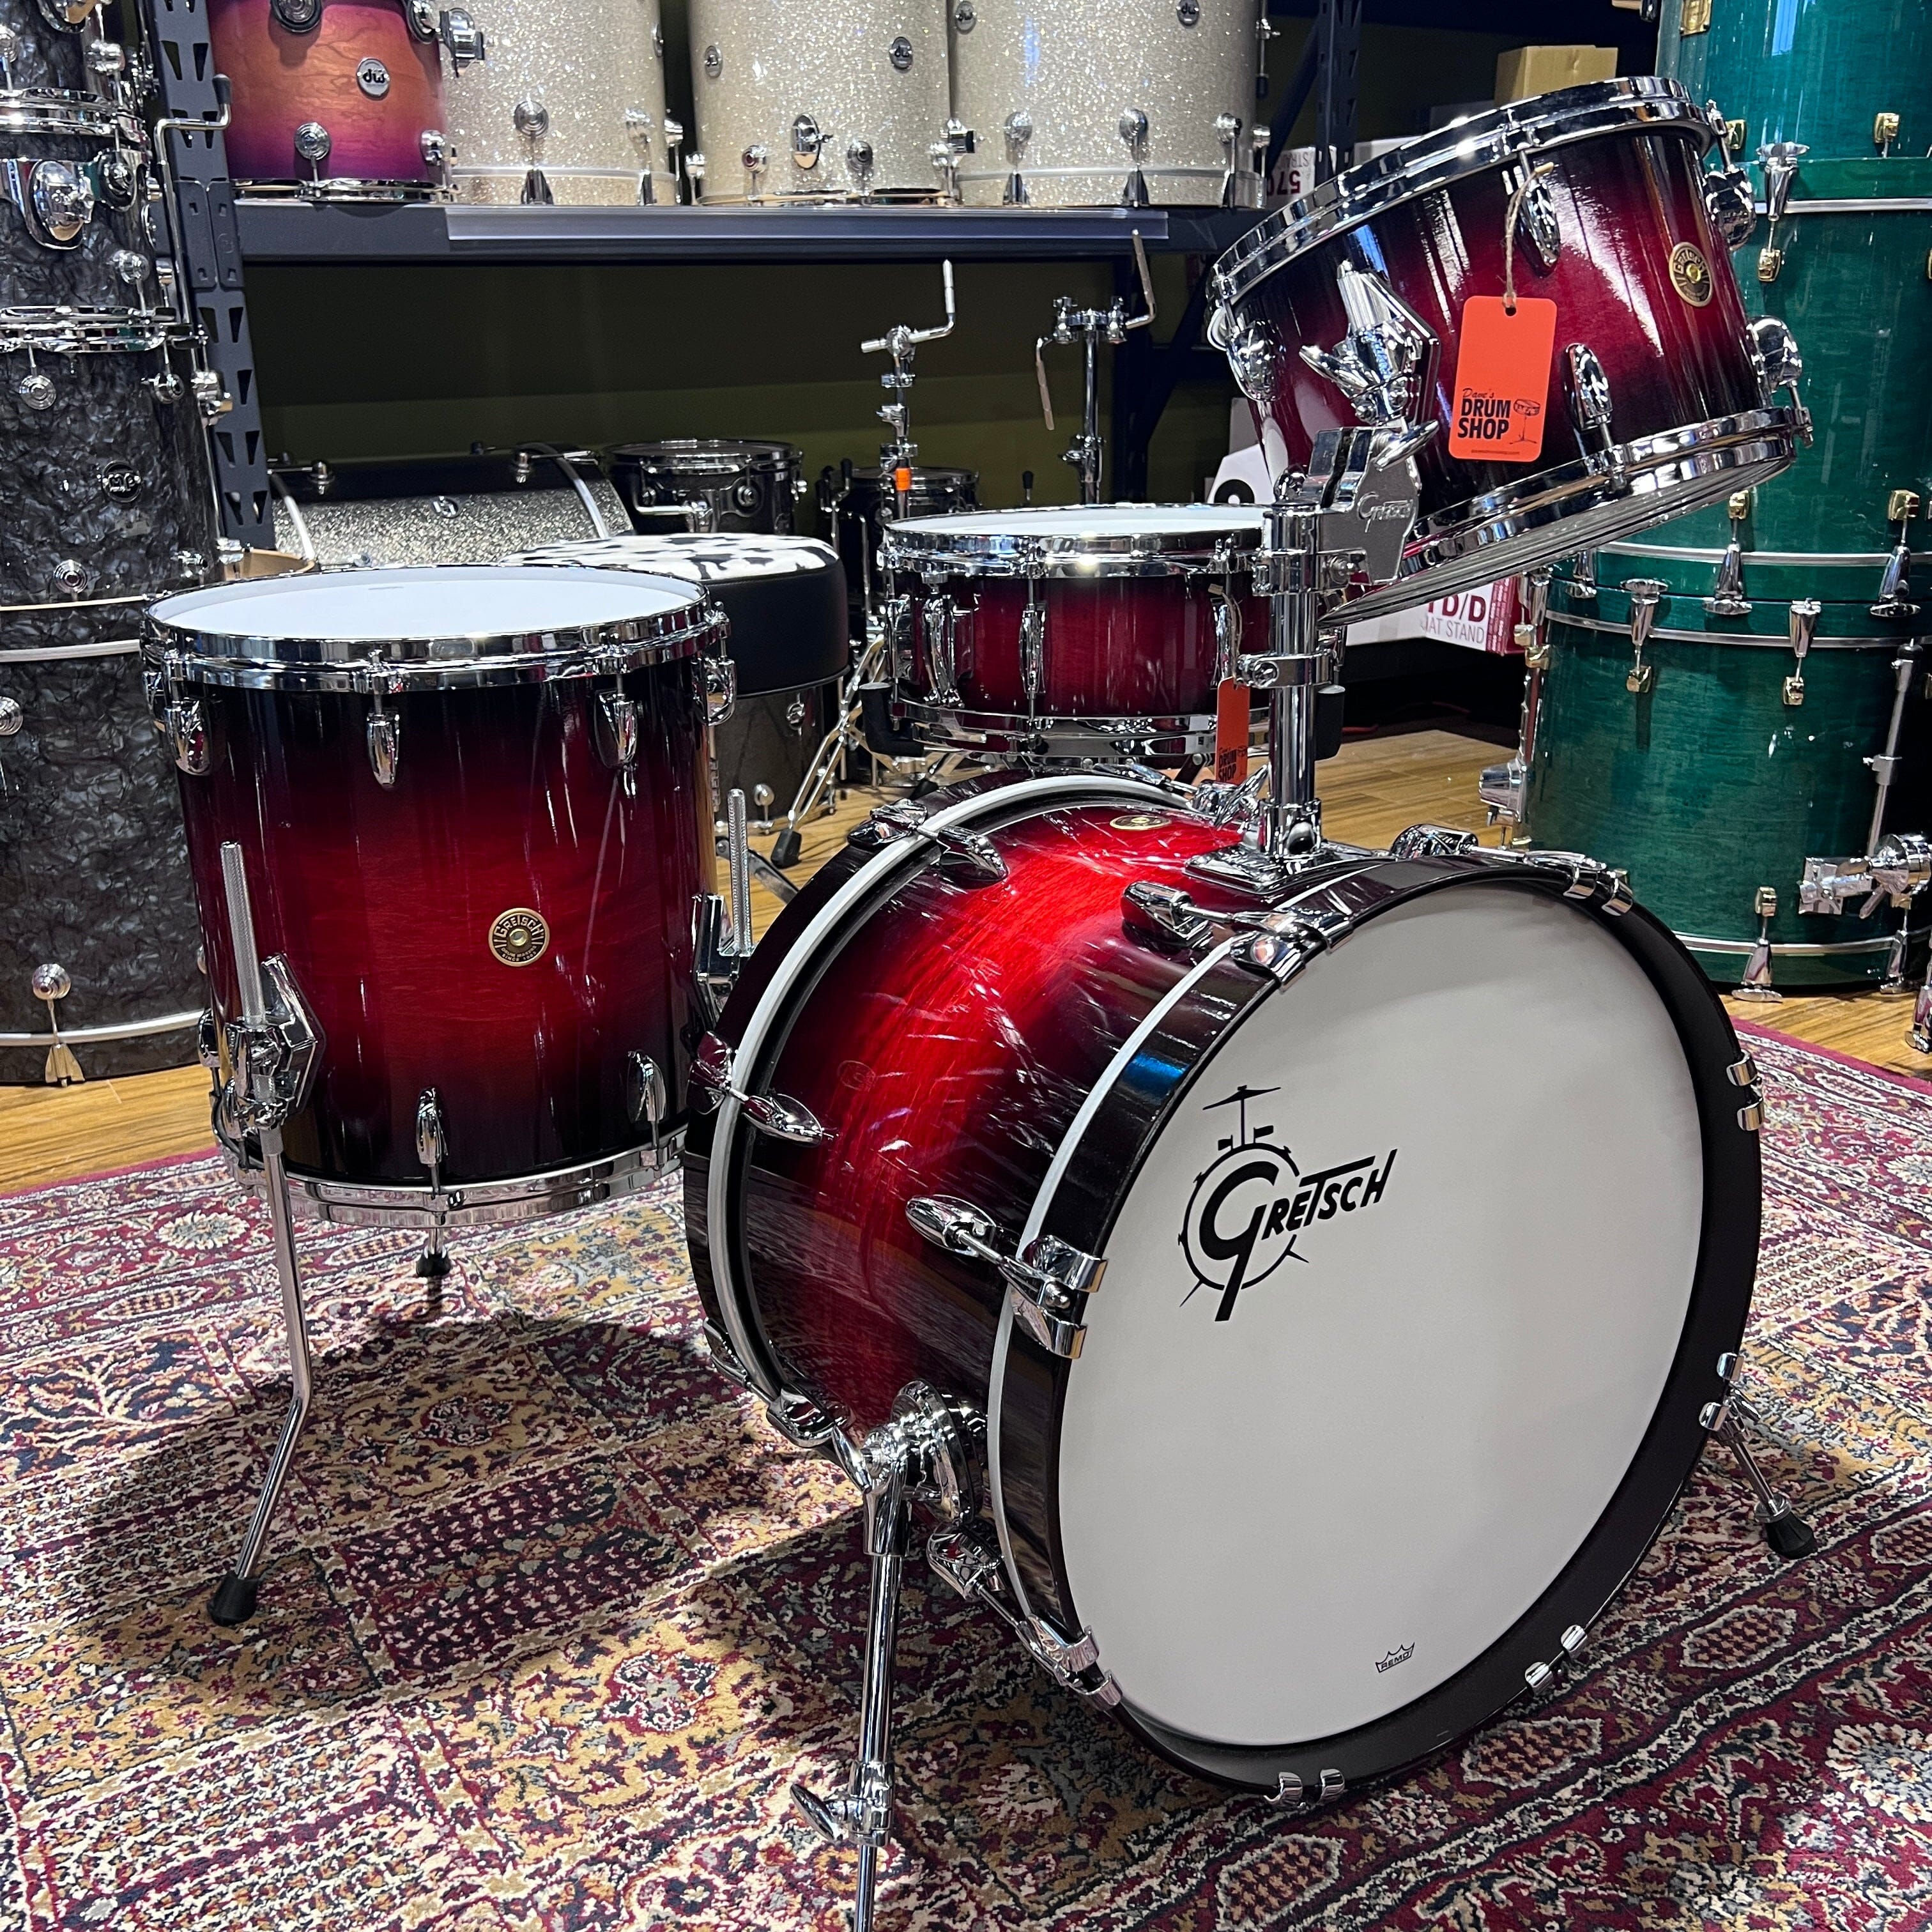 Gretsch USA Custom 12/14/20 Rosewood Twighlight Gloss Lacquer NEW DRUM KIT Gretsch 